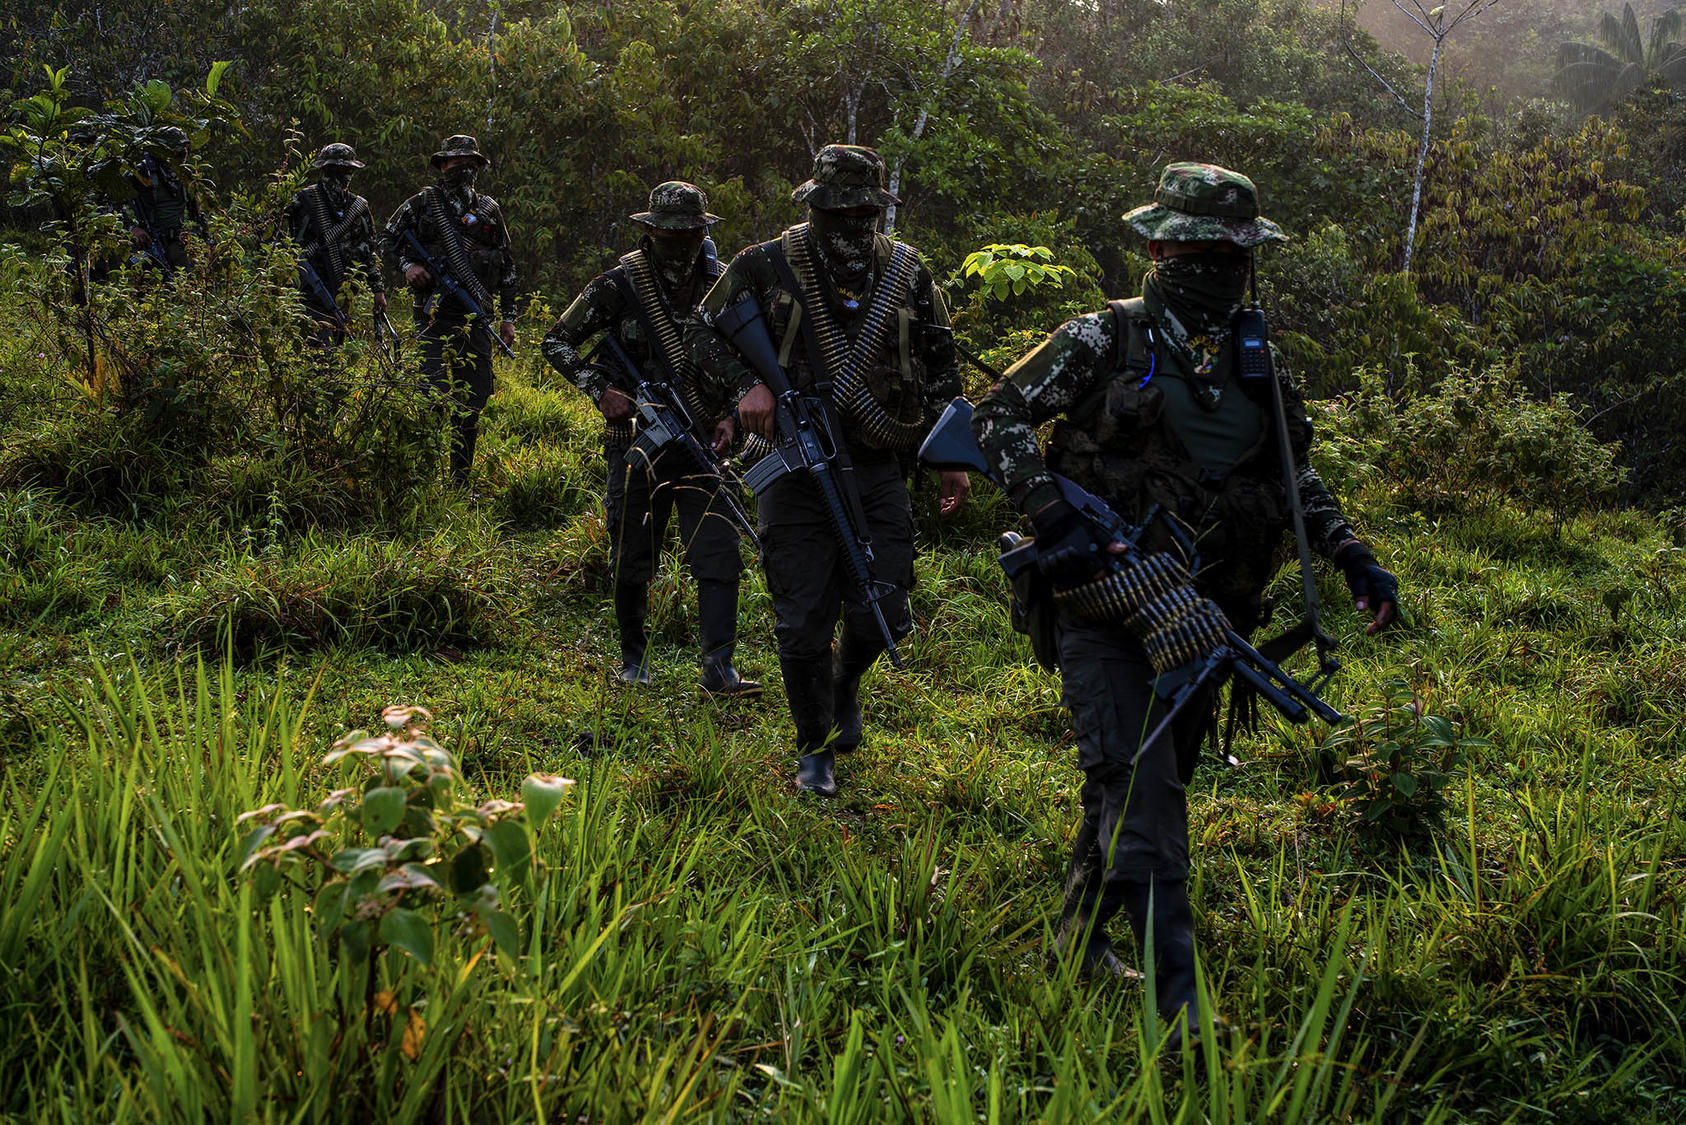 Masked fighters of a militia called Border Command move through jungle terrain last year. The group rejected Colombia’s 2016 peace accord and reportedly traffics drugs along Colombia’s southern borders. (Federico Rios/The New York Times)